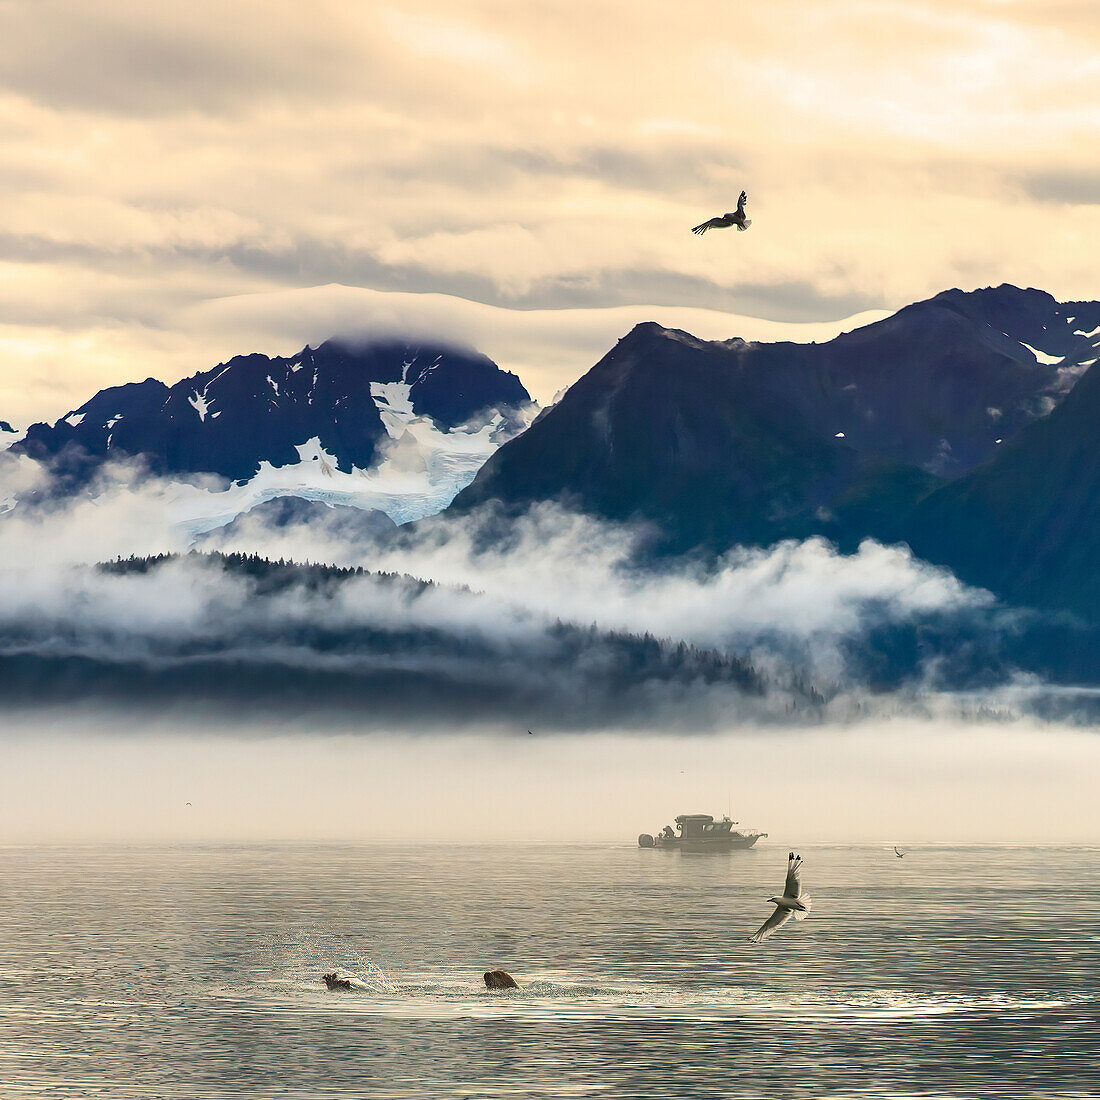 Fishing boat in Kenai Peninsula surrounded by mountains and wildlife